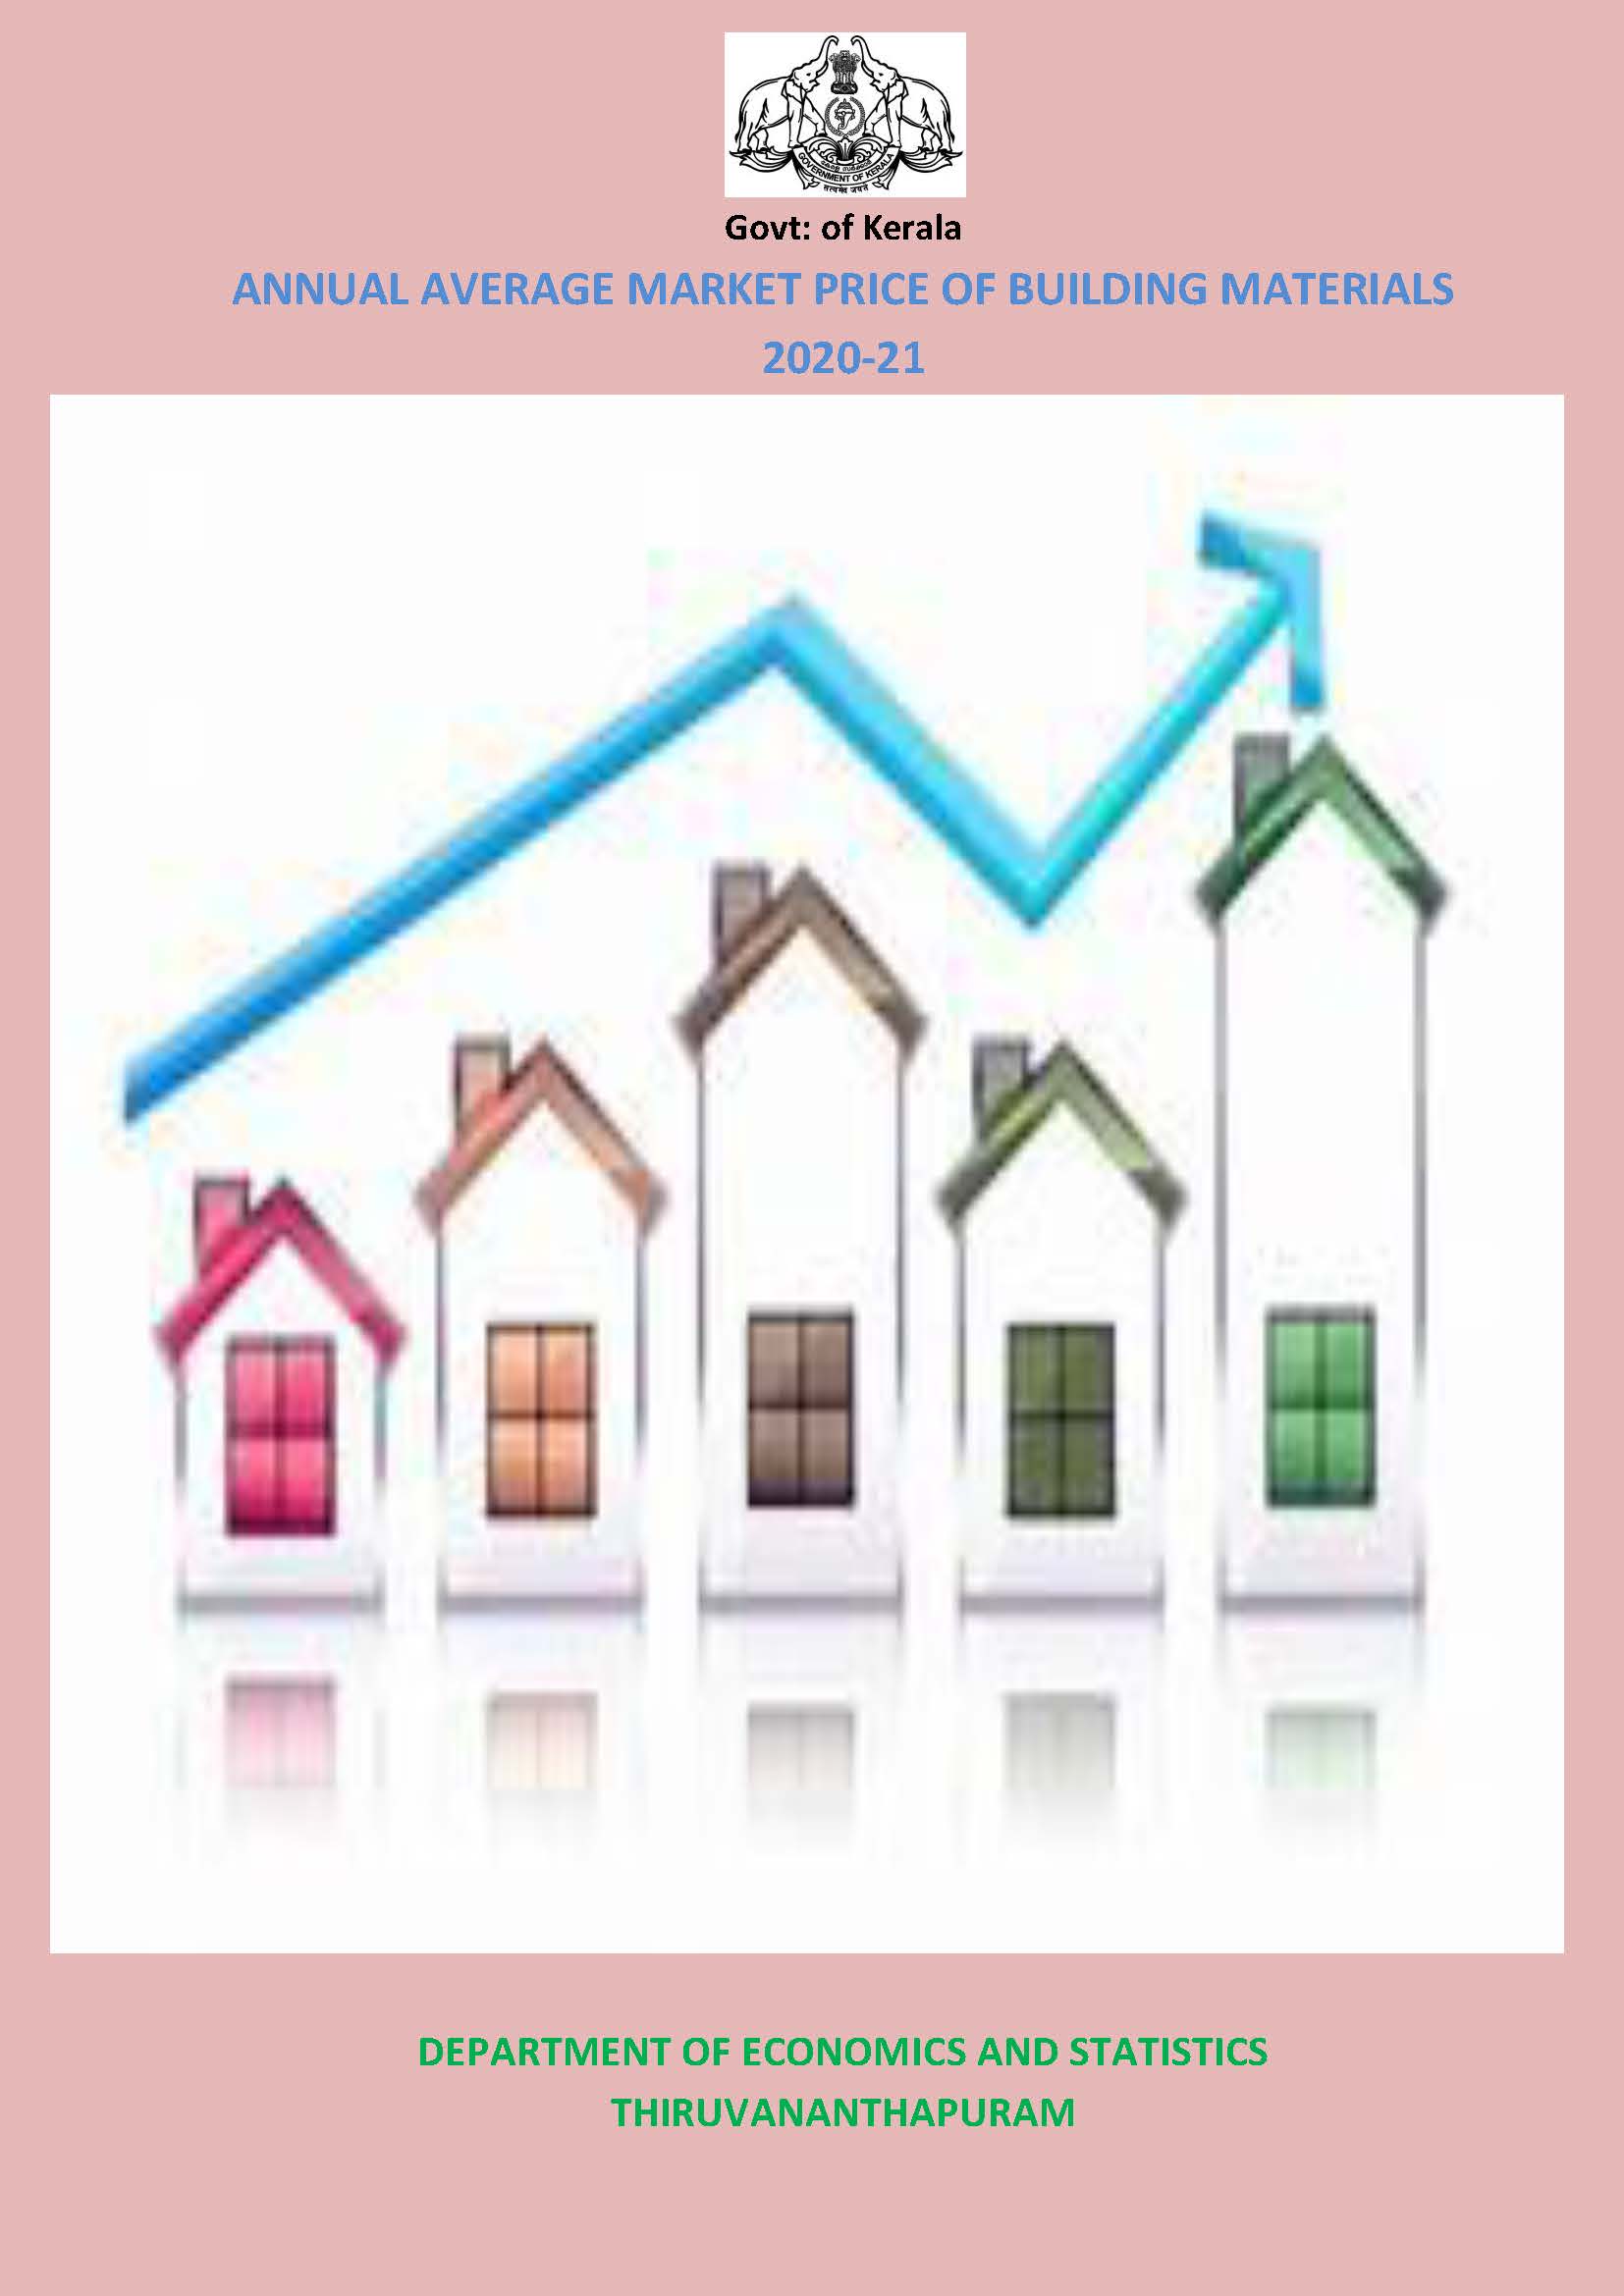 Annual Average Market Price of building Materials for the Year 2020-21